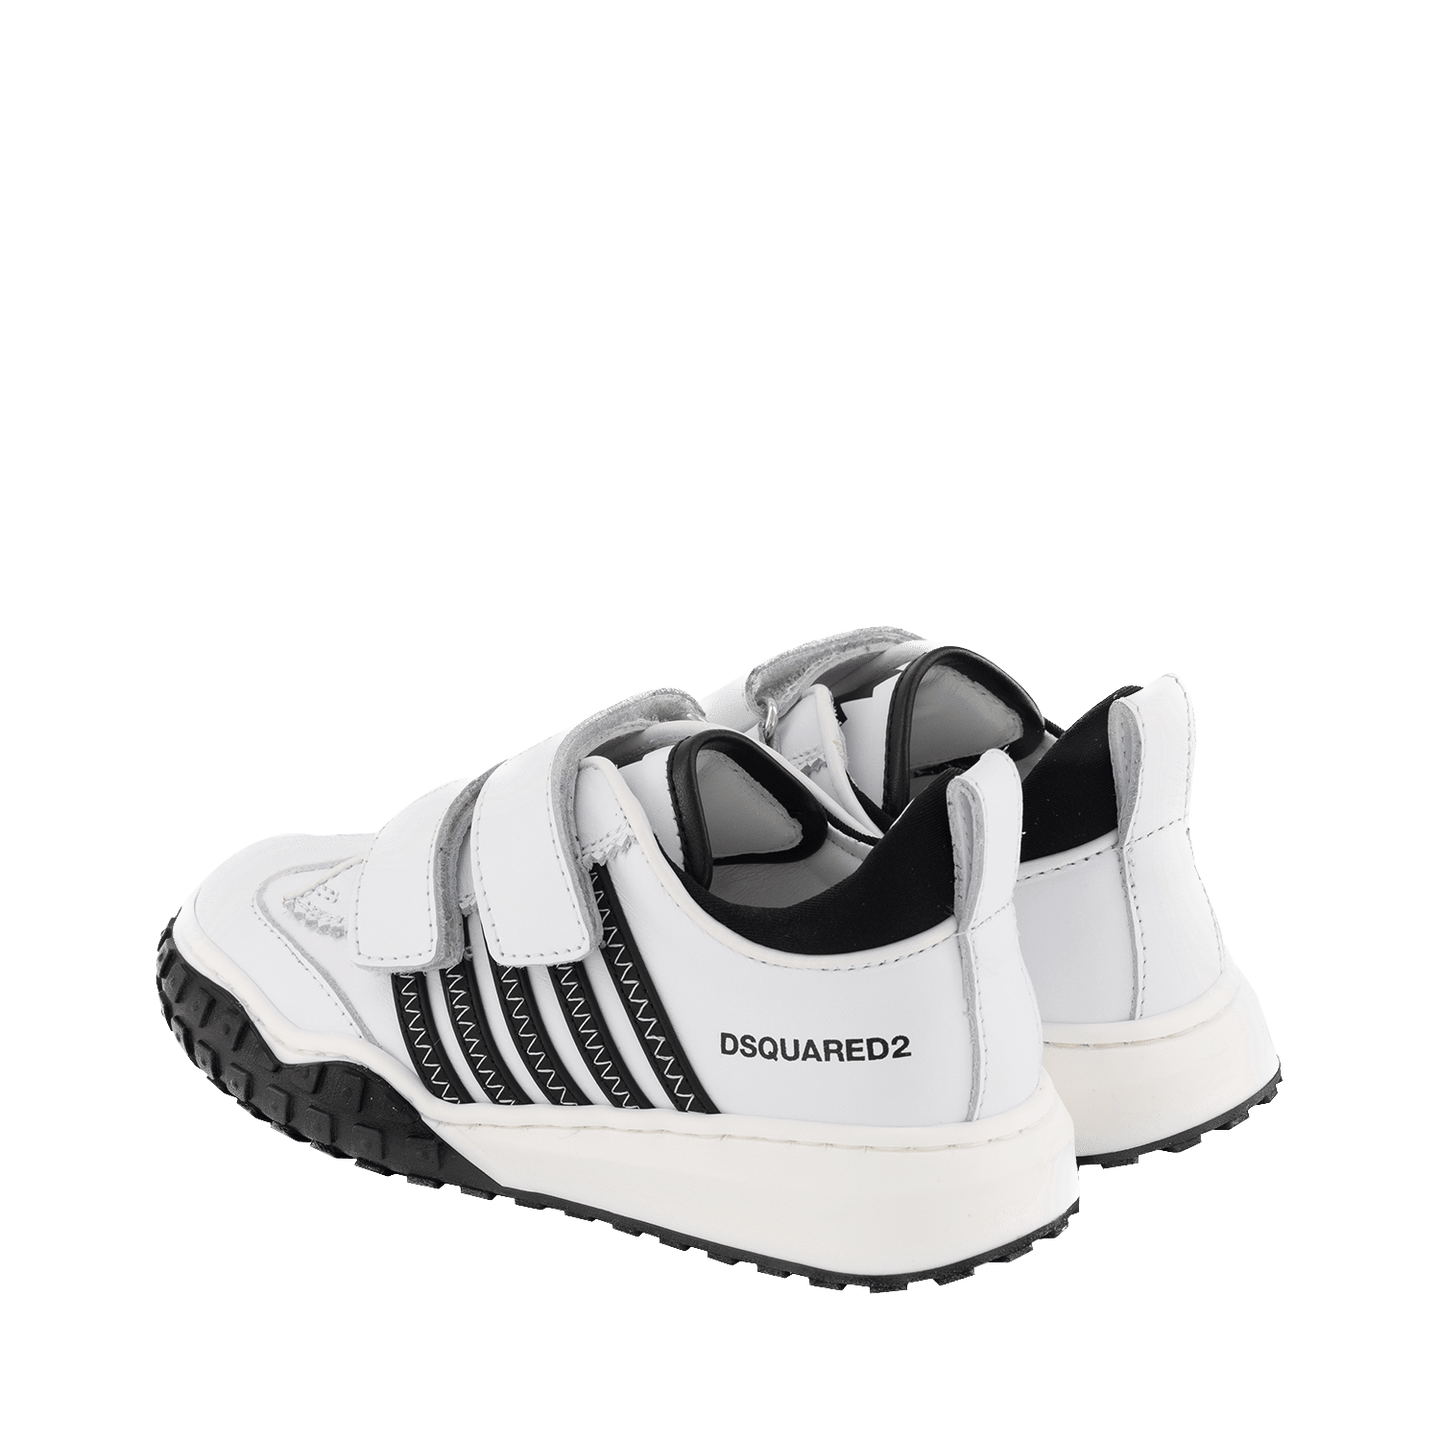 Dsquared2 Kinder Unisex Sneakers Wit 29